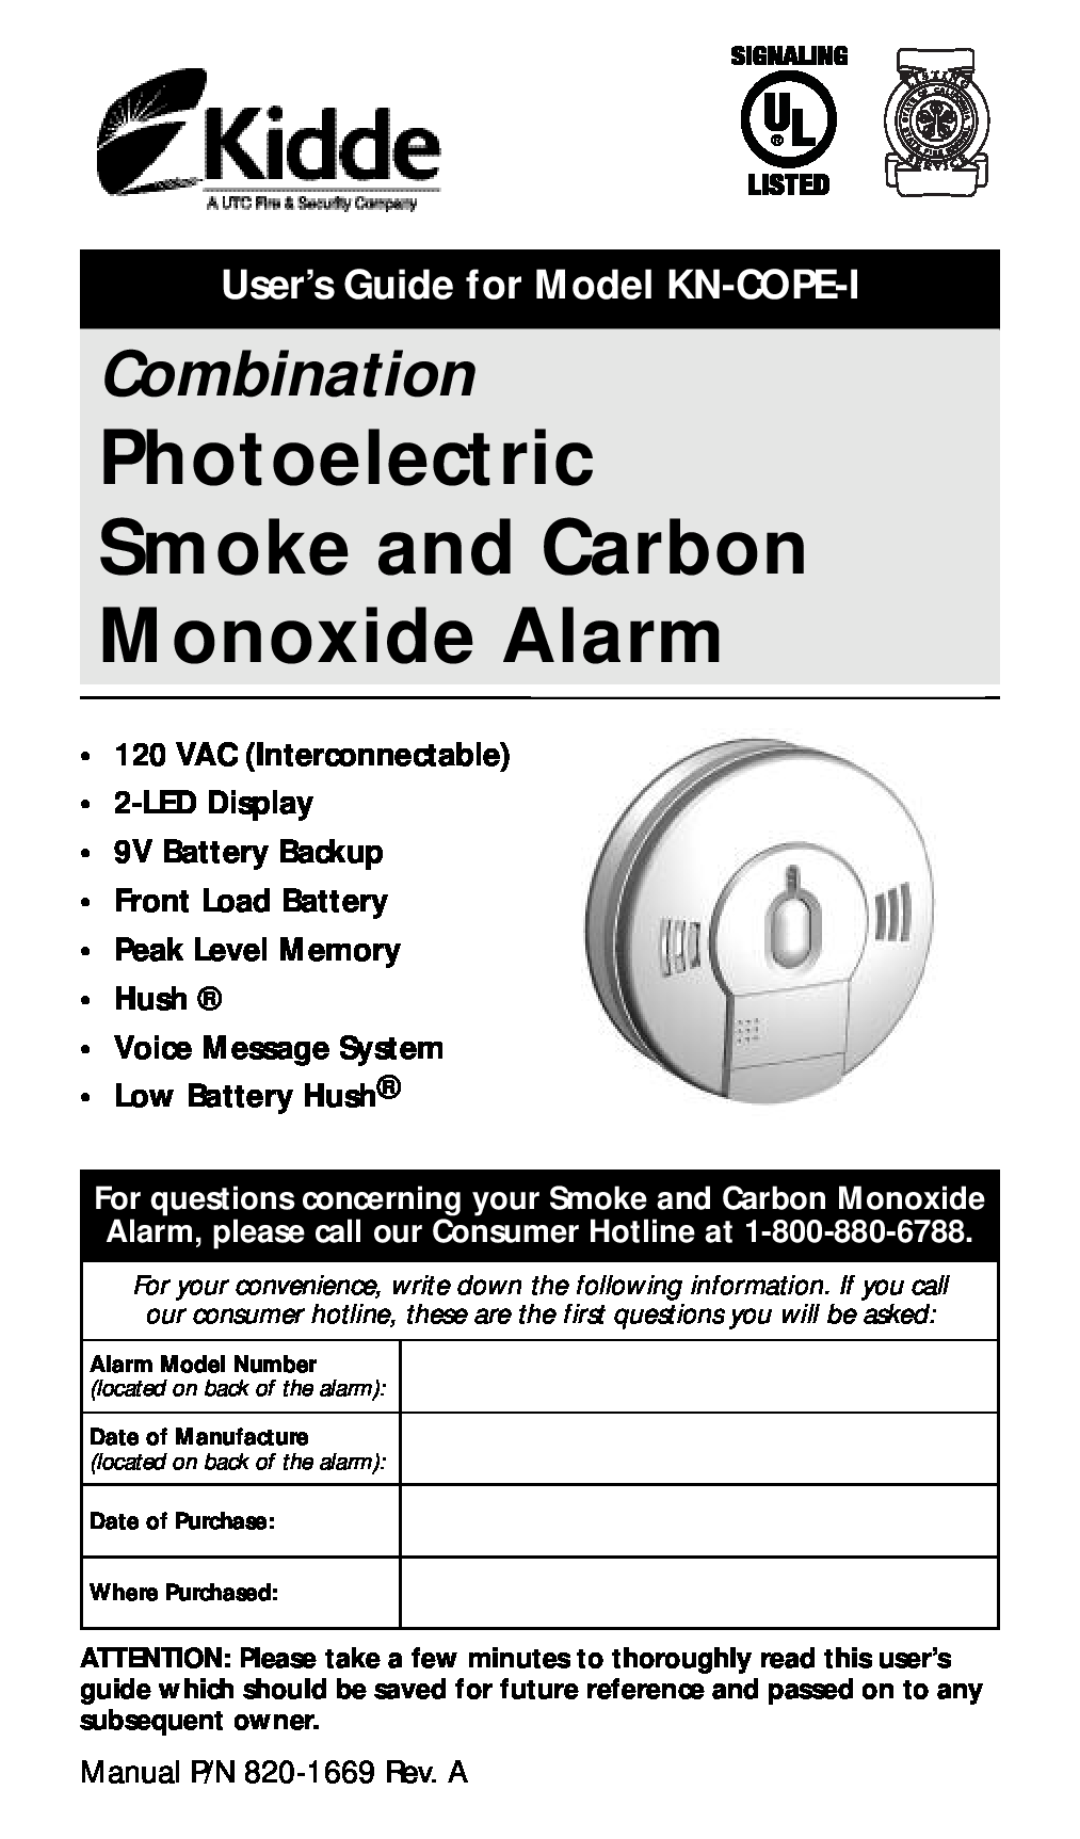 Kidde manual User’s Guide for Model KN-COPE-I, Photoelectric Smoke and Carbon Monoxide Alarm, Combination 